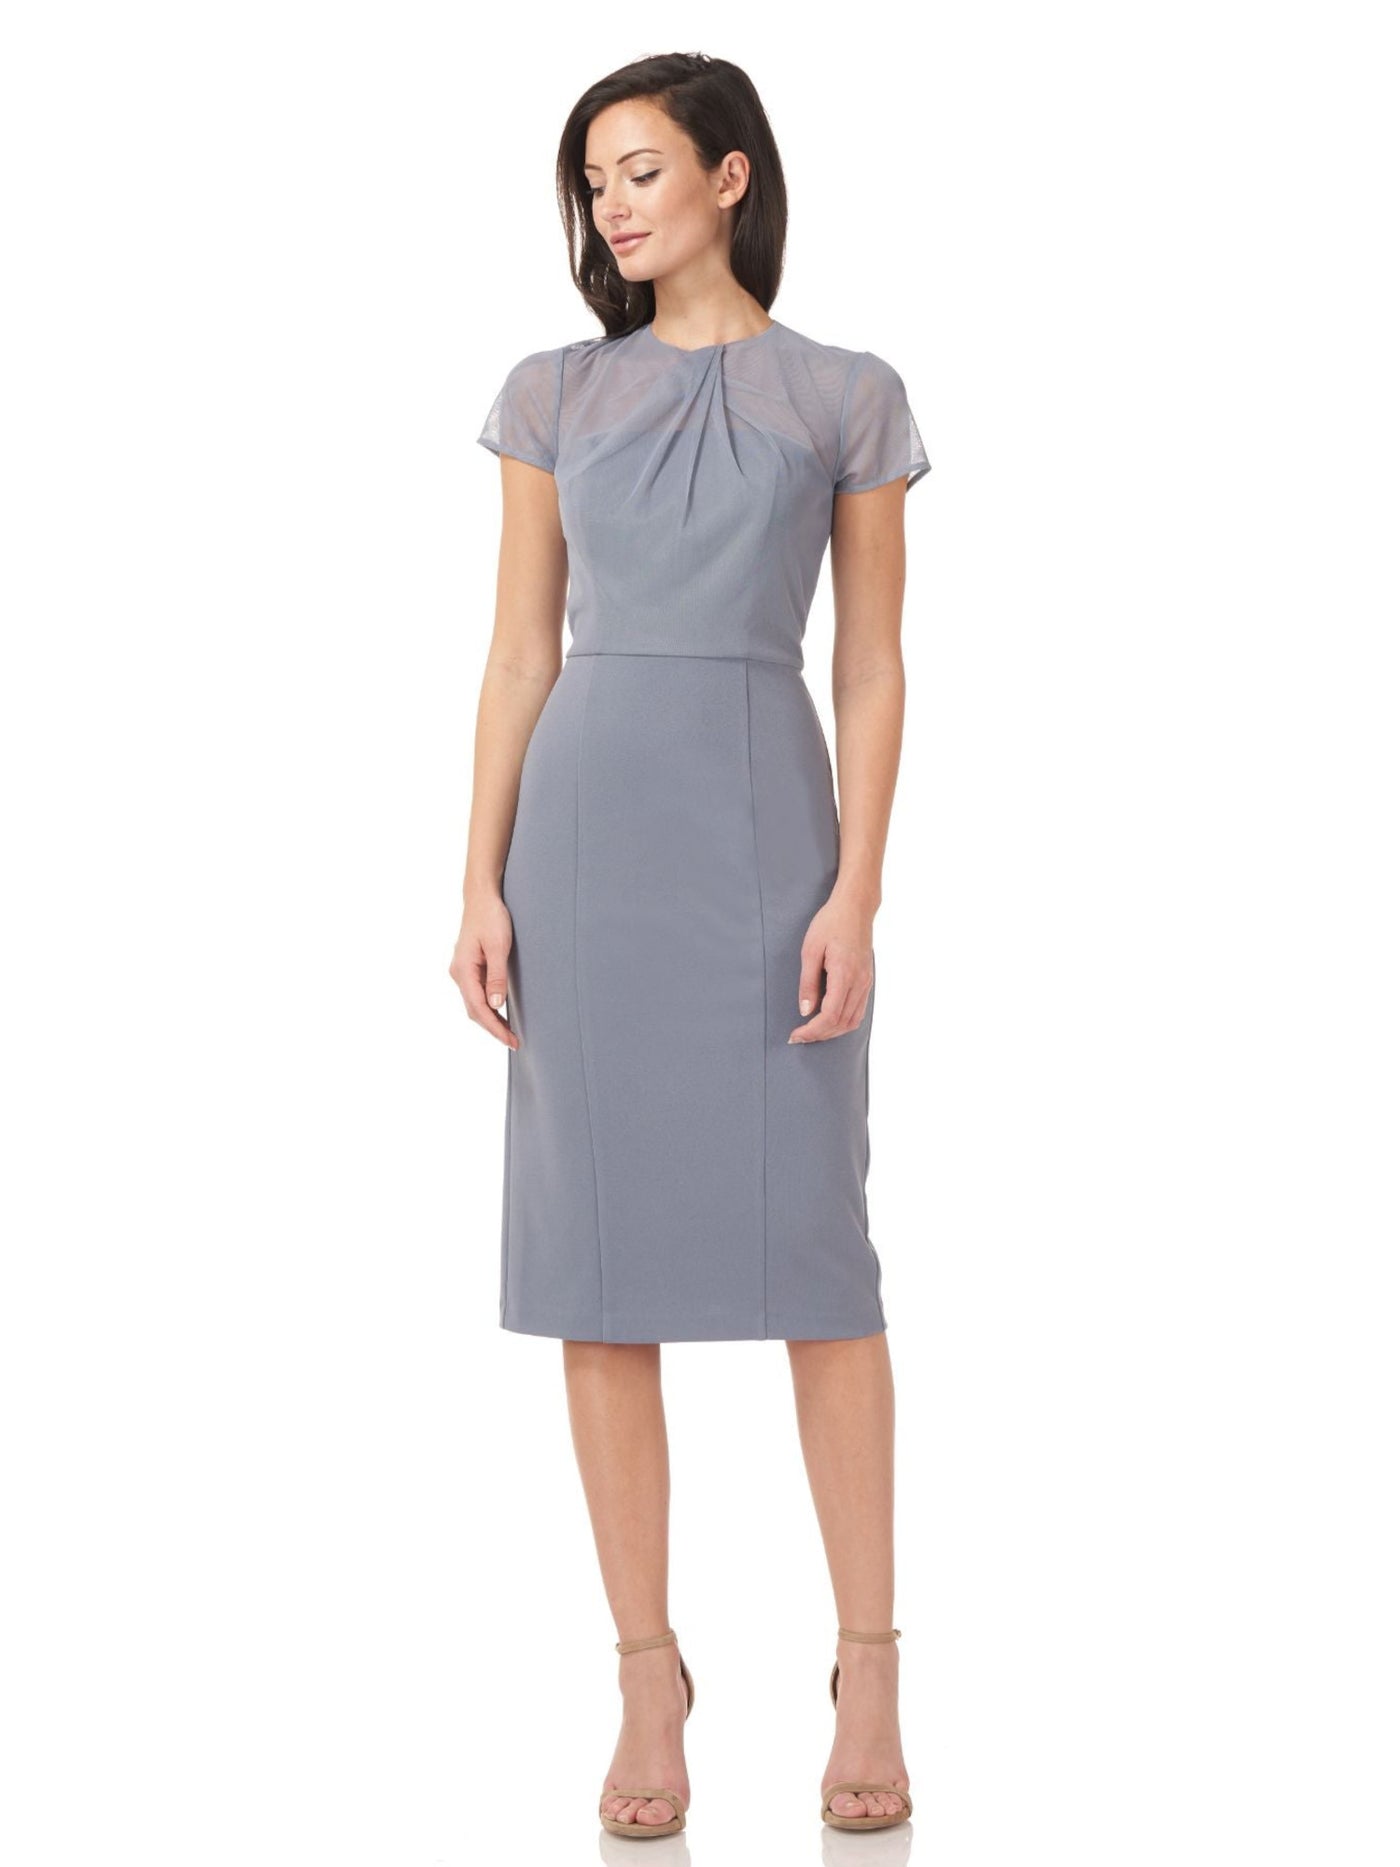 JS COLLECTIONS Womens Gray Stretch Pleated Zippered Lined Short Sleeve Illusion Neckline Knee Length Evening Sheath Dress 12